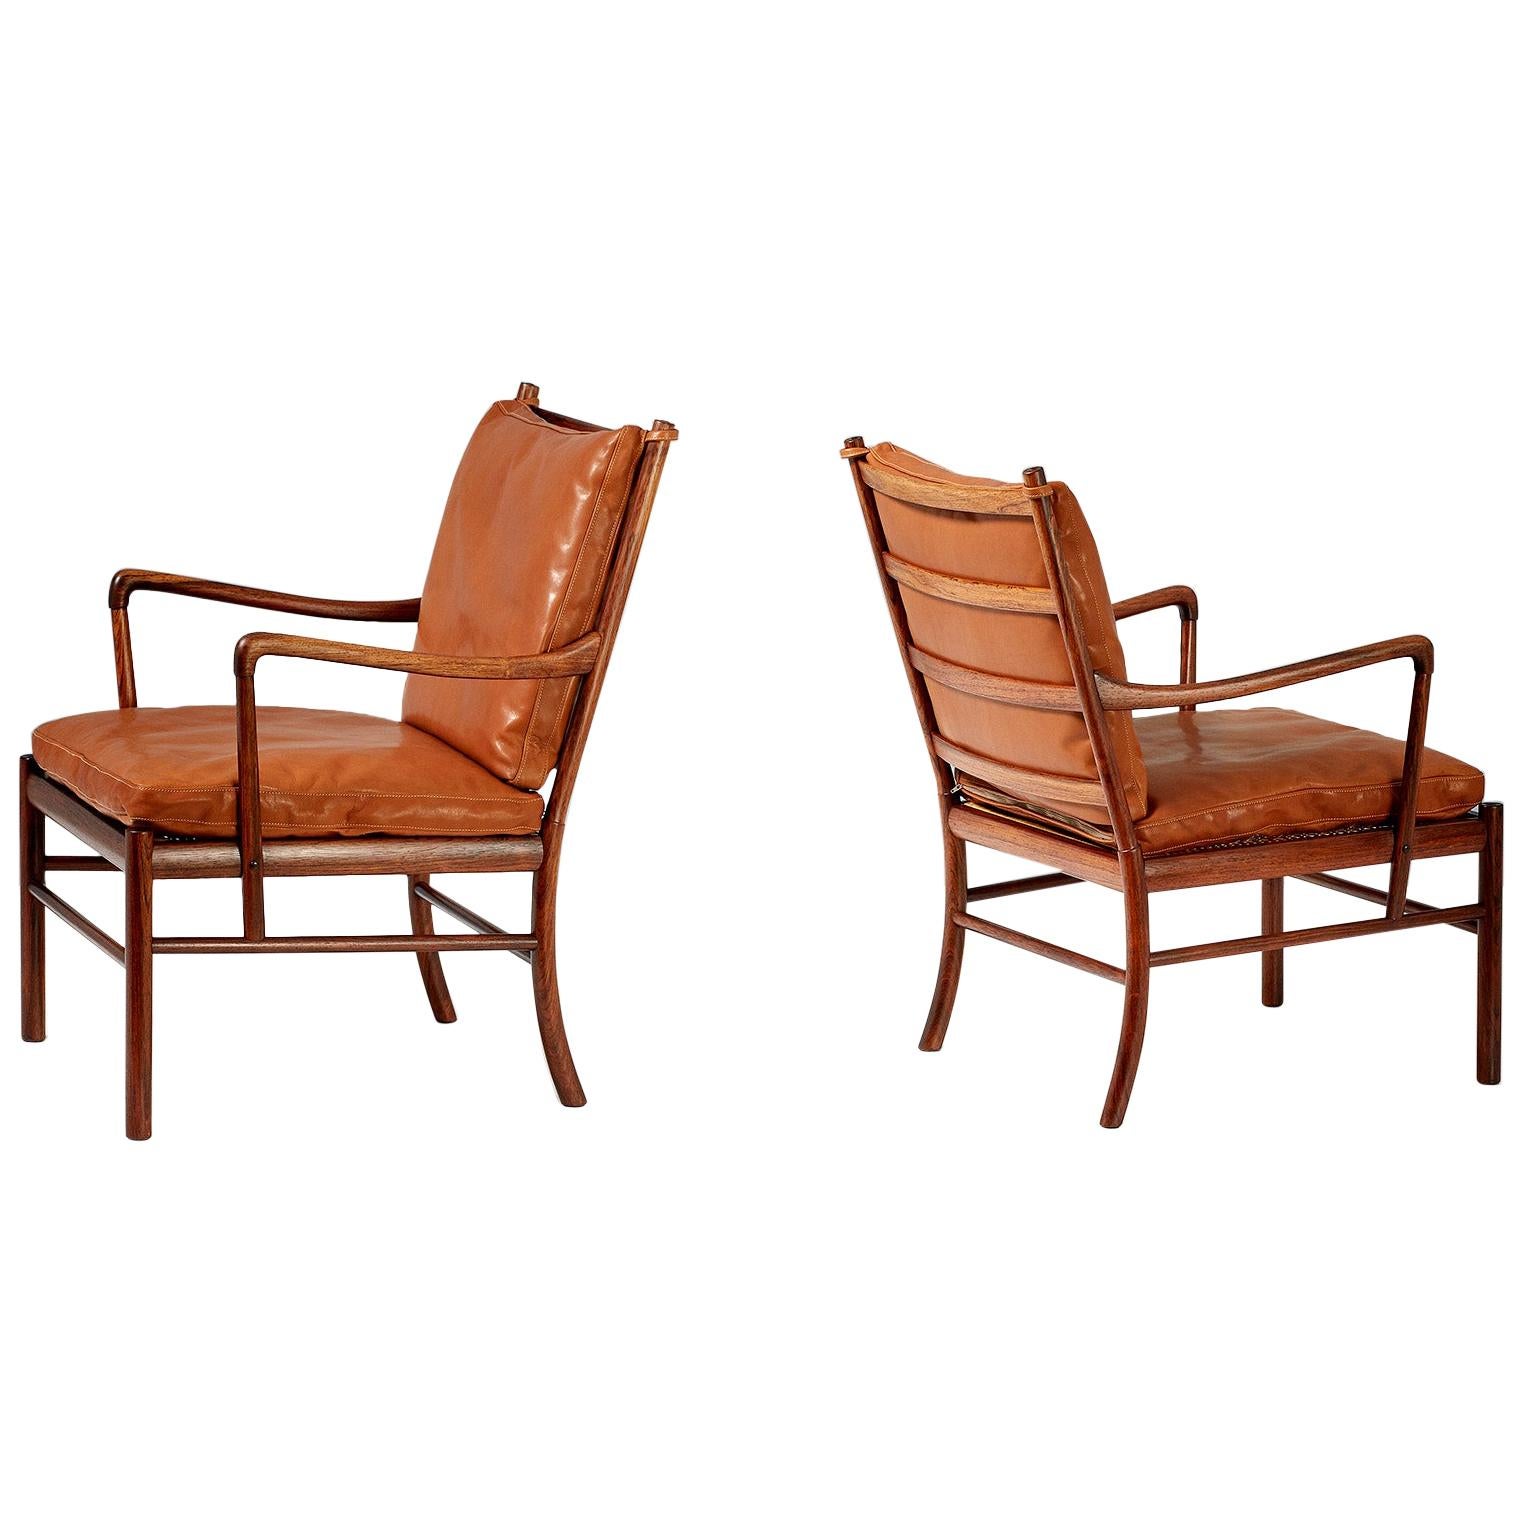 Ole Wanscher Pair of Rosewood Colonial Chairs, 1950s For Sale